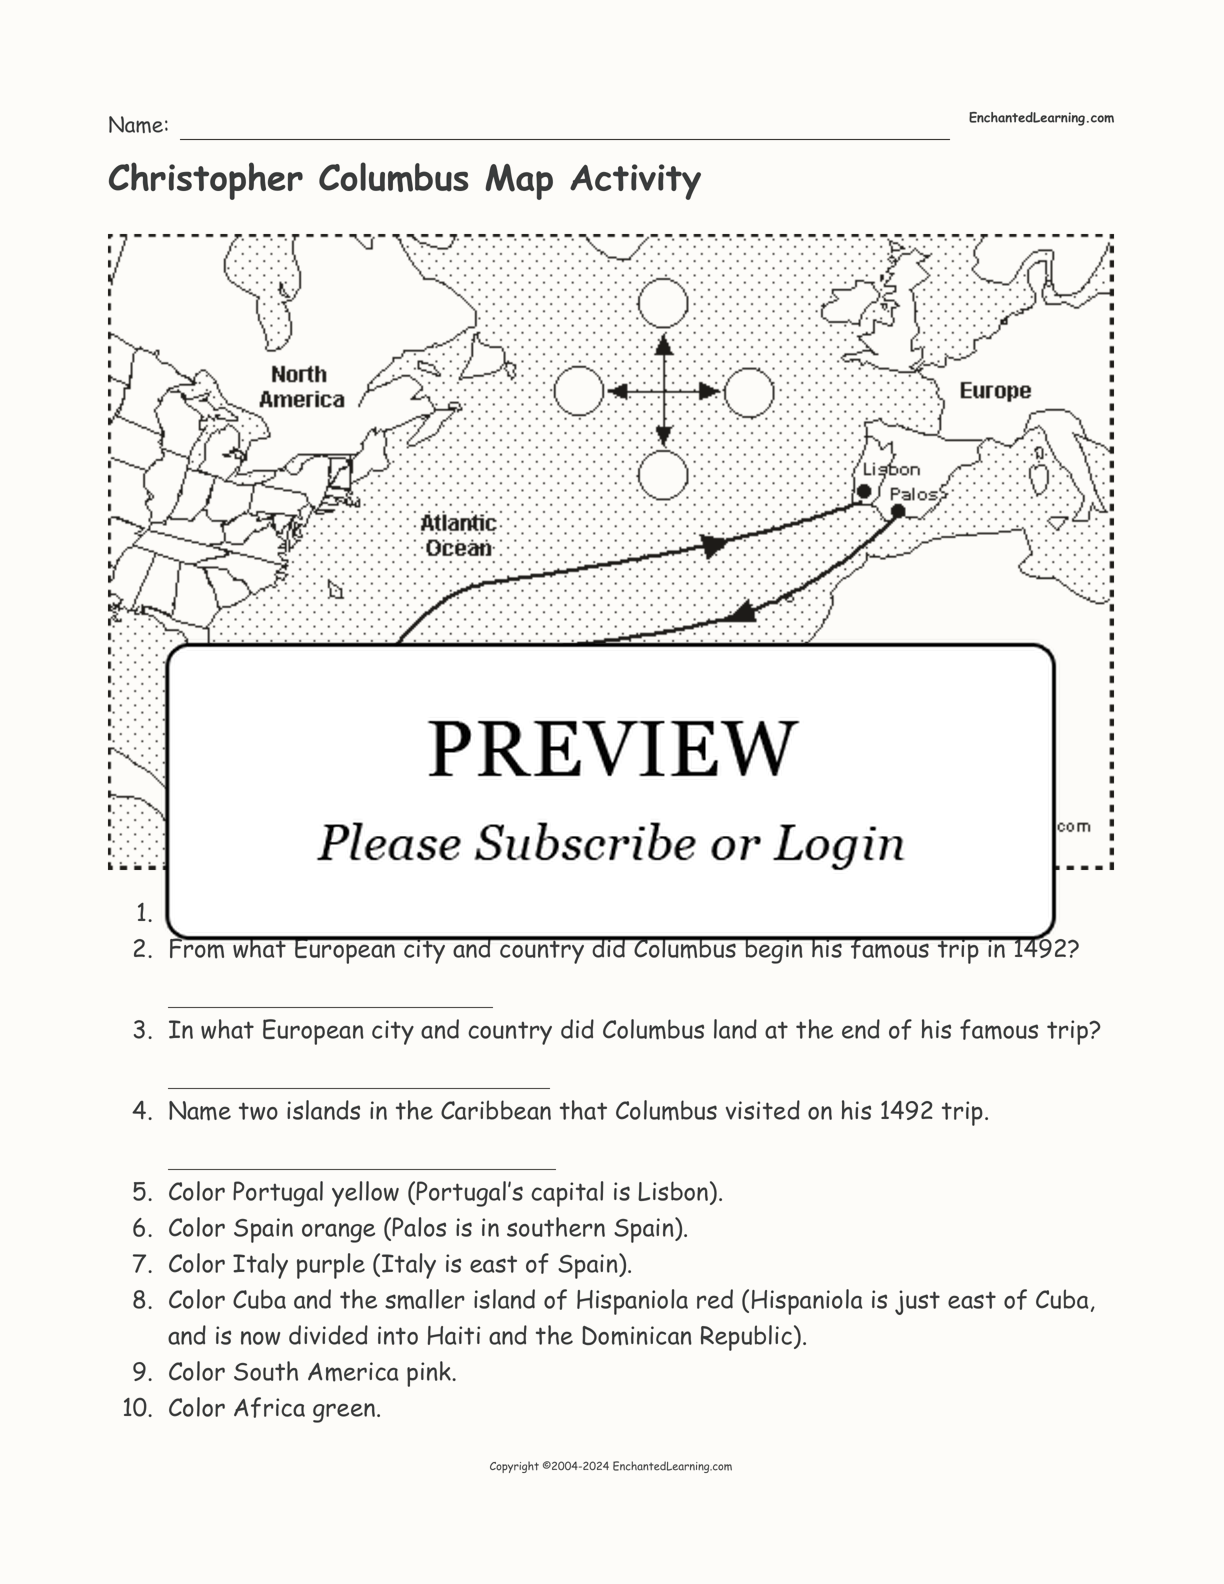 Christopher Columbus Map Activity Enchanted Learning